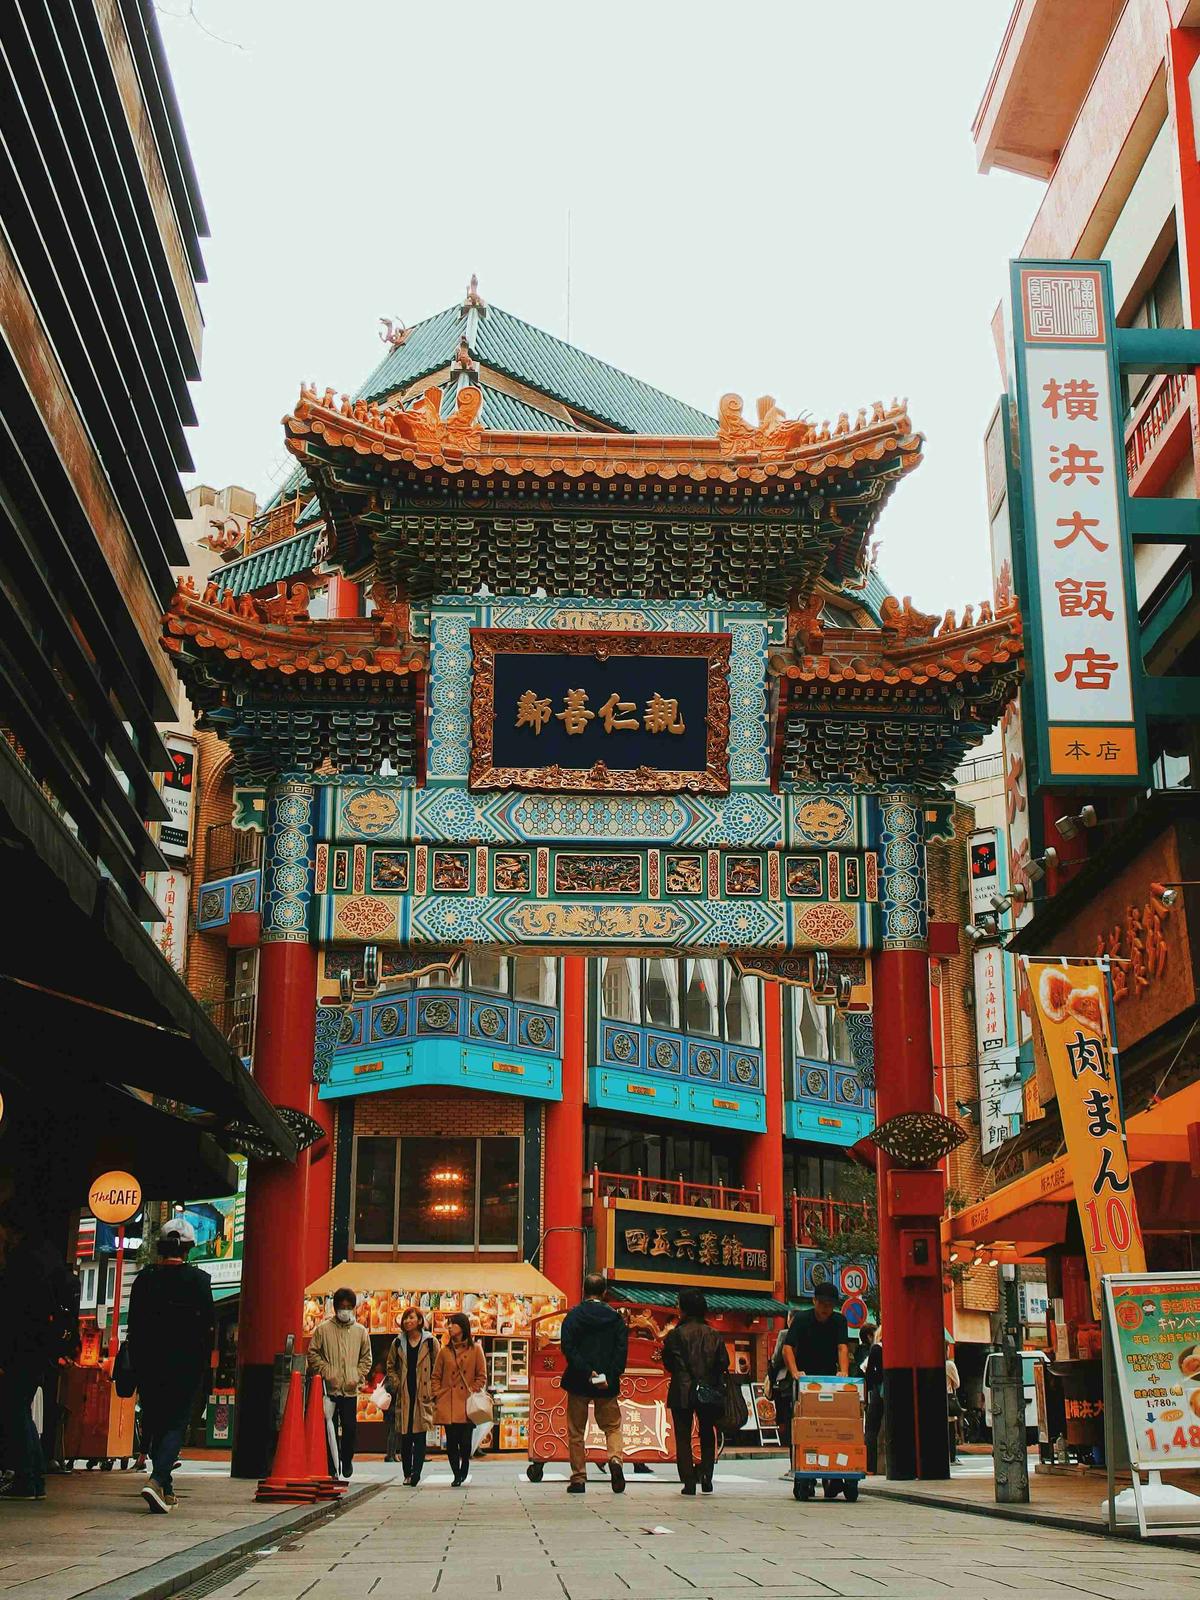 Vibrant Entrance to Chinatown with Pedestrians